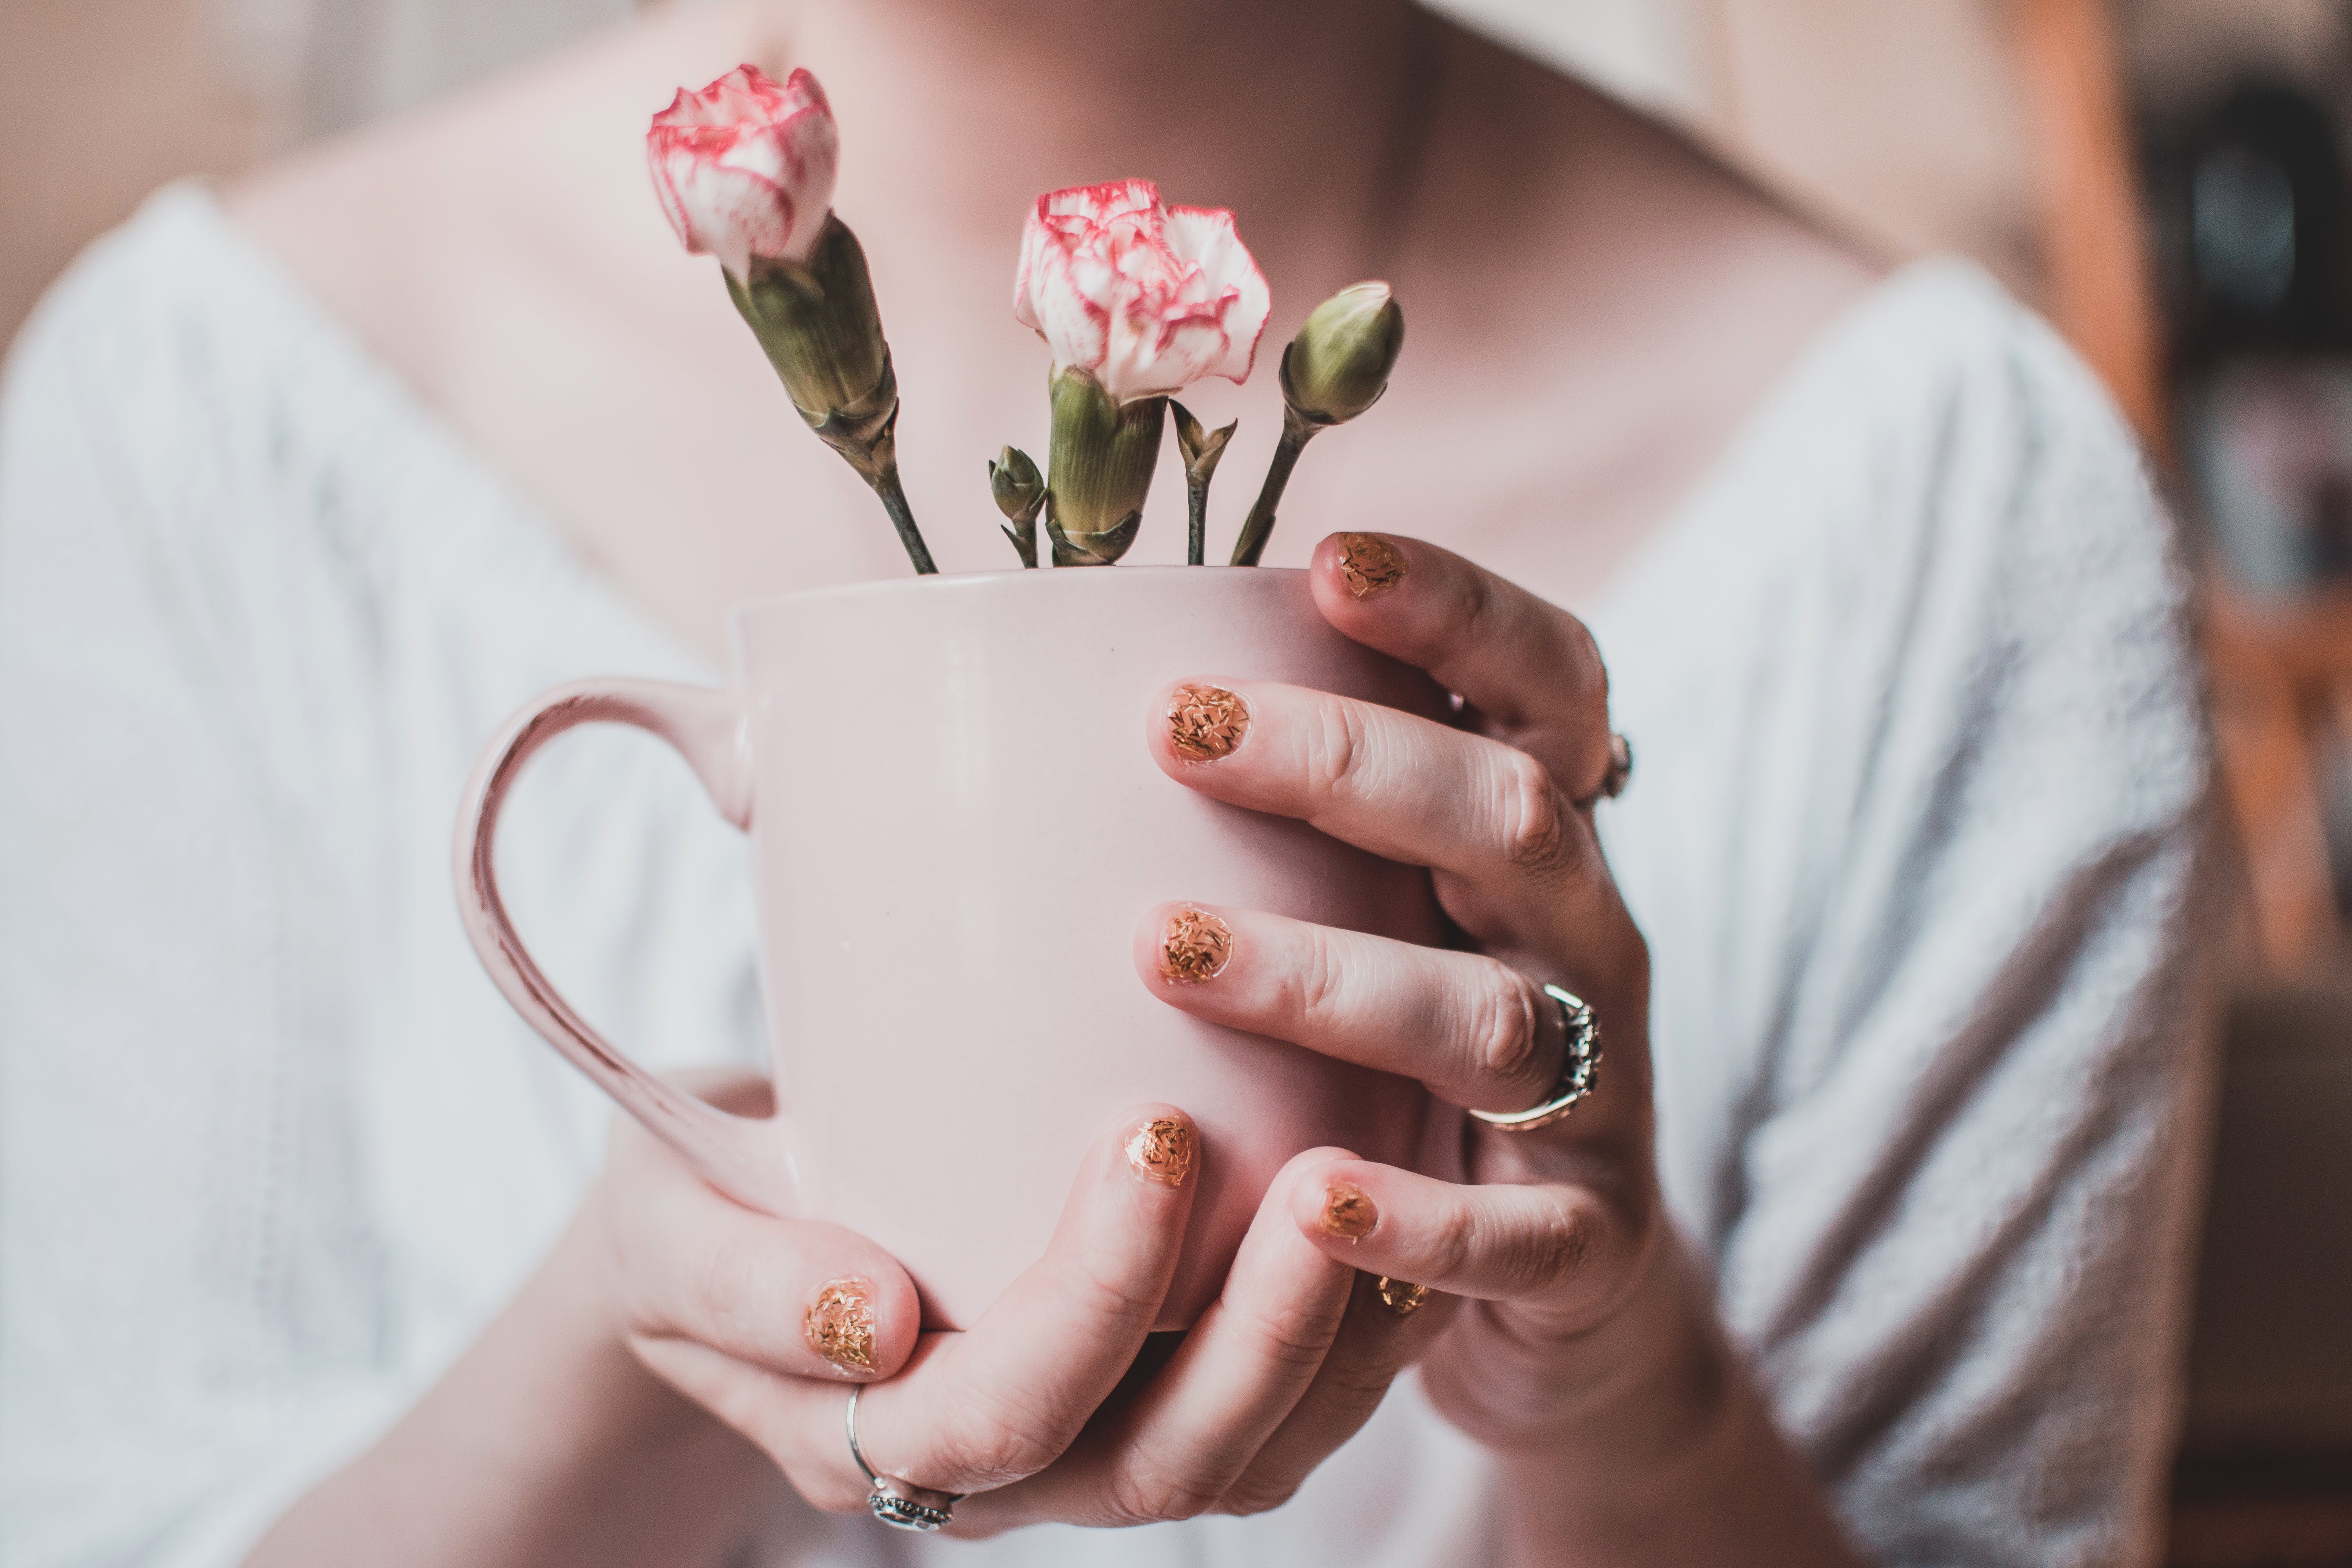 woman with glittery nail polish and stainless steel ring holding a mug with flowers